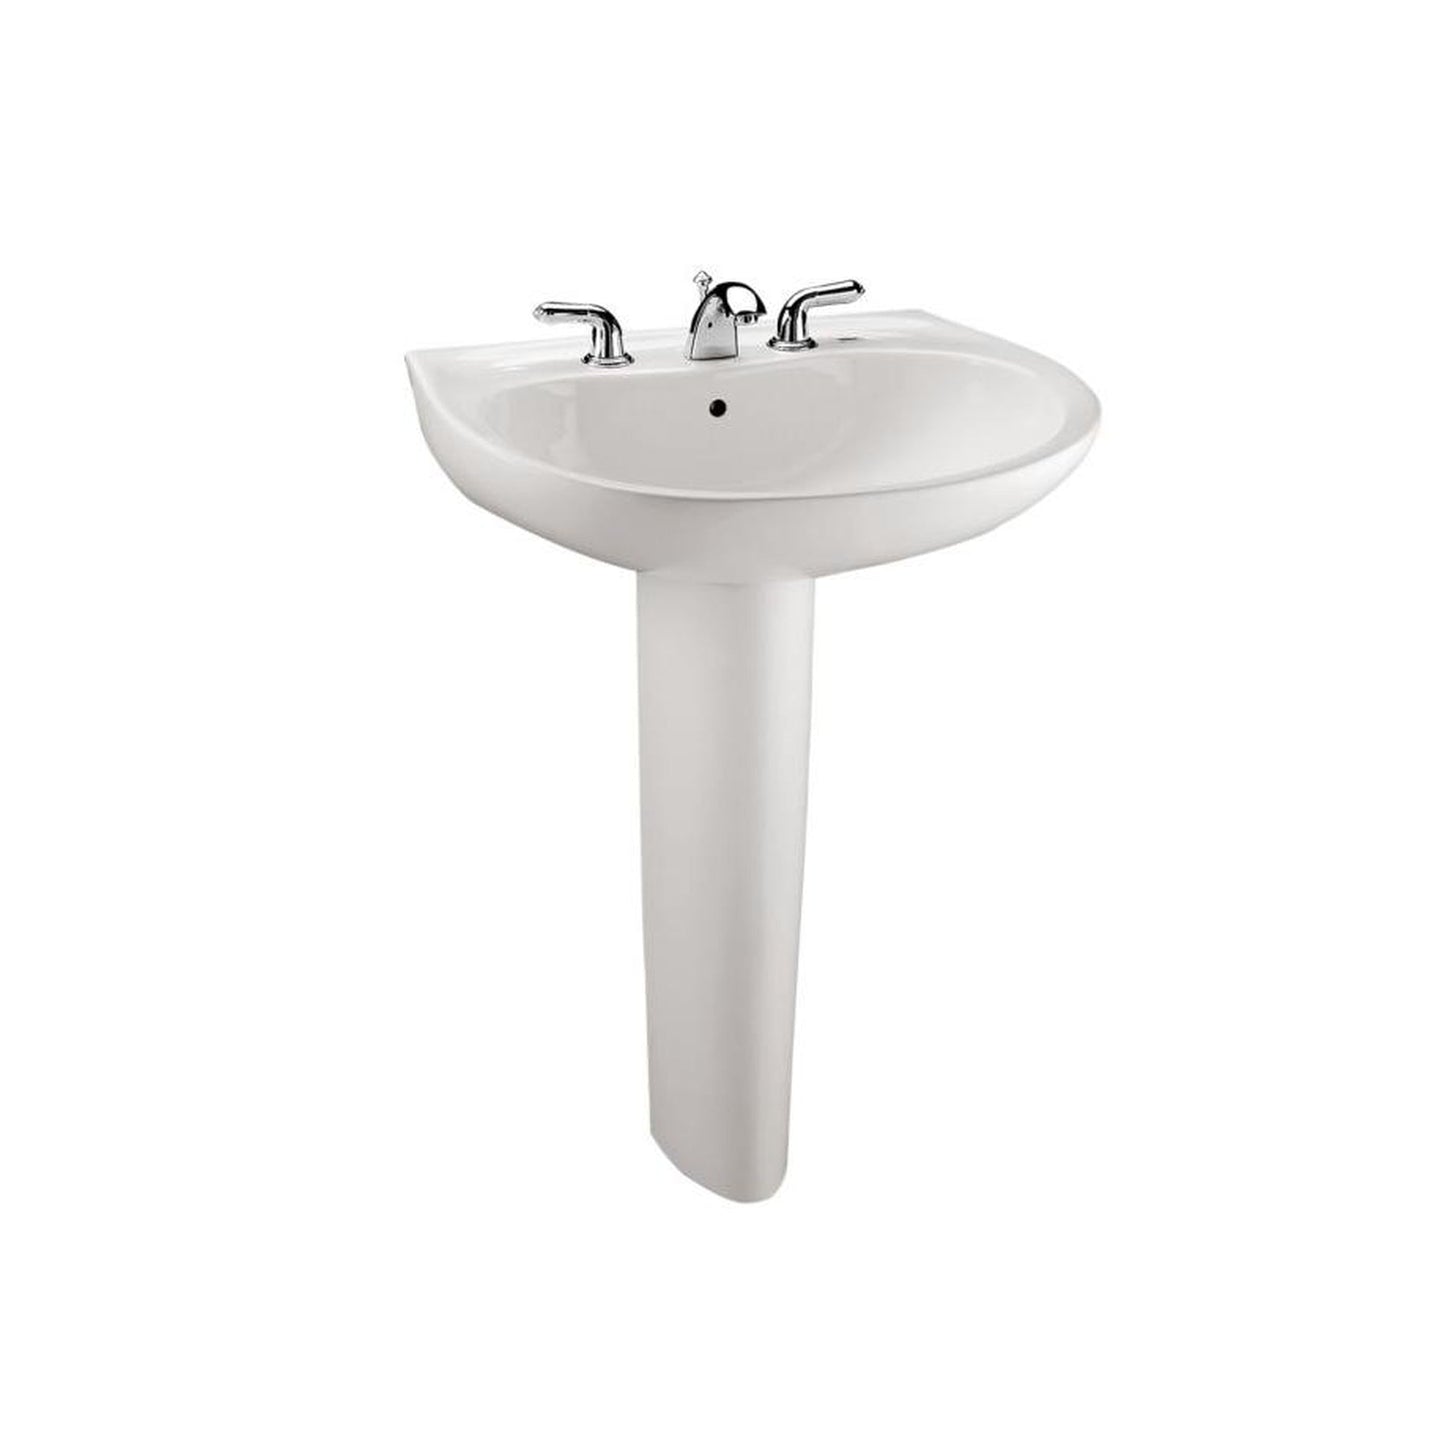 Toto Prominence 1-Hole Lav & Ped Colonial White